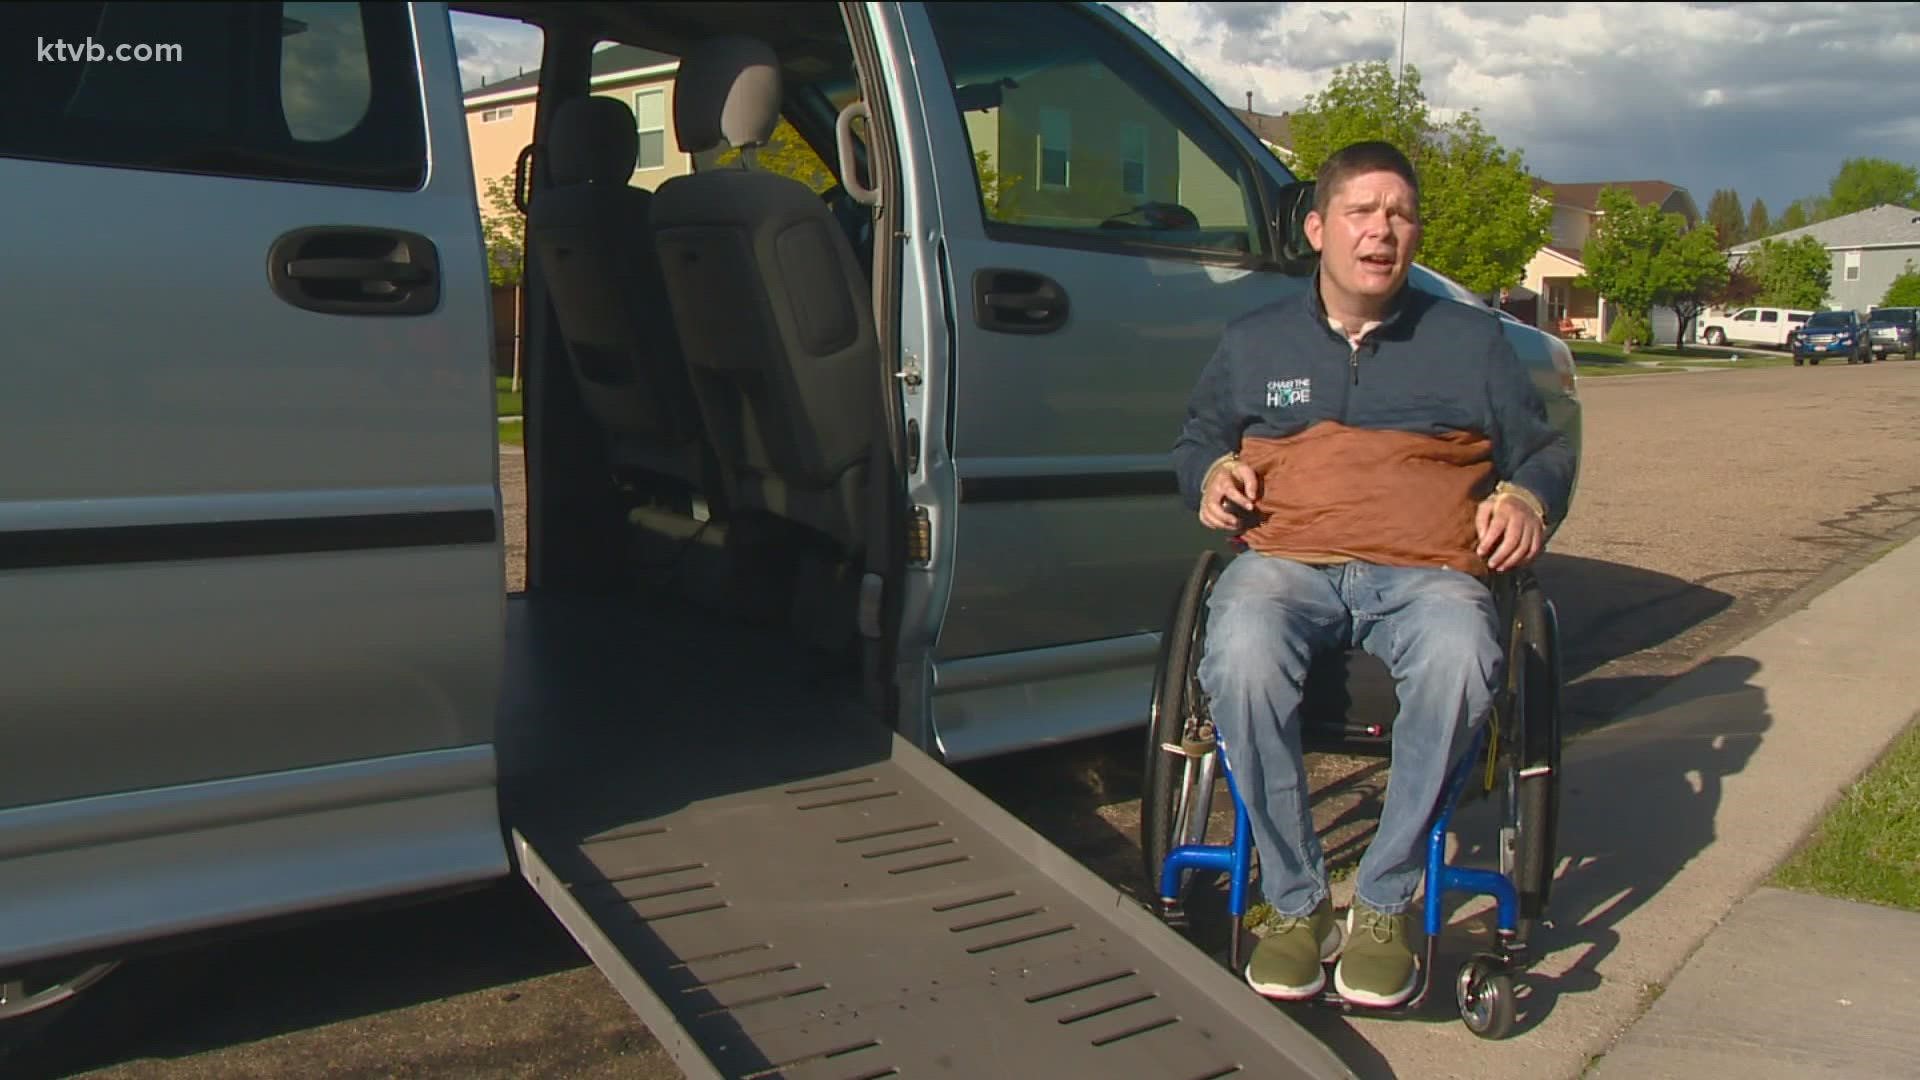 Nathan Ogden, founder of Chair the Hope, uses a wheelchair and knows how important an adapted van is. He delivered one to the Yascovitch family for their son, Jase.